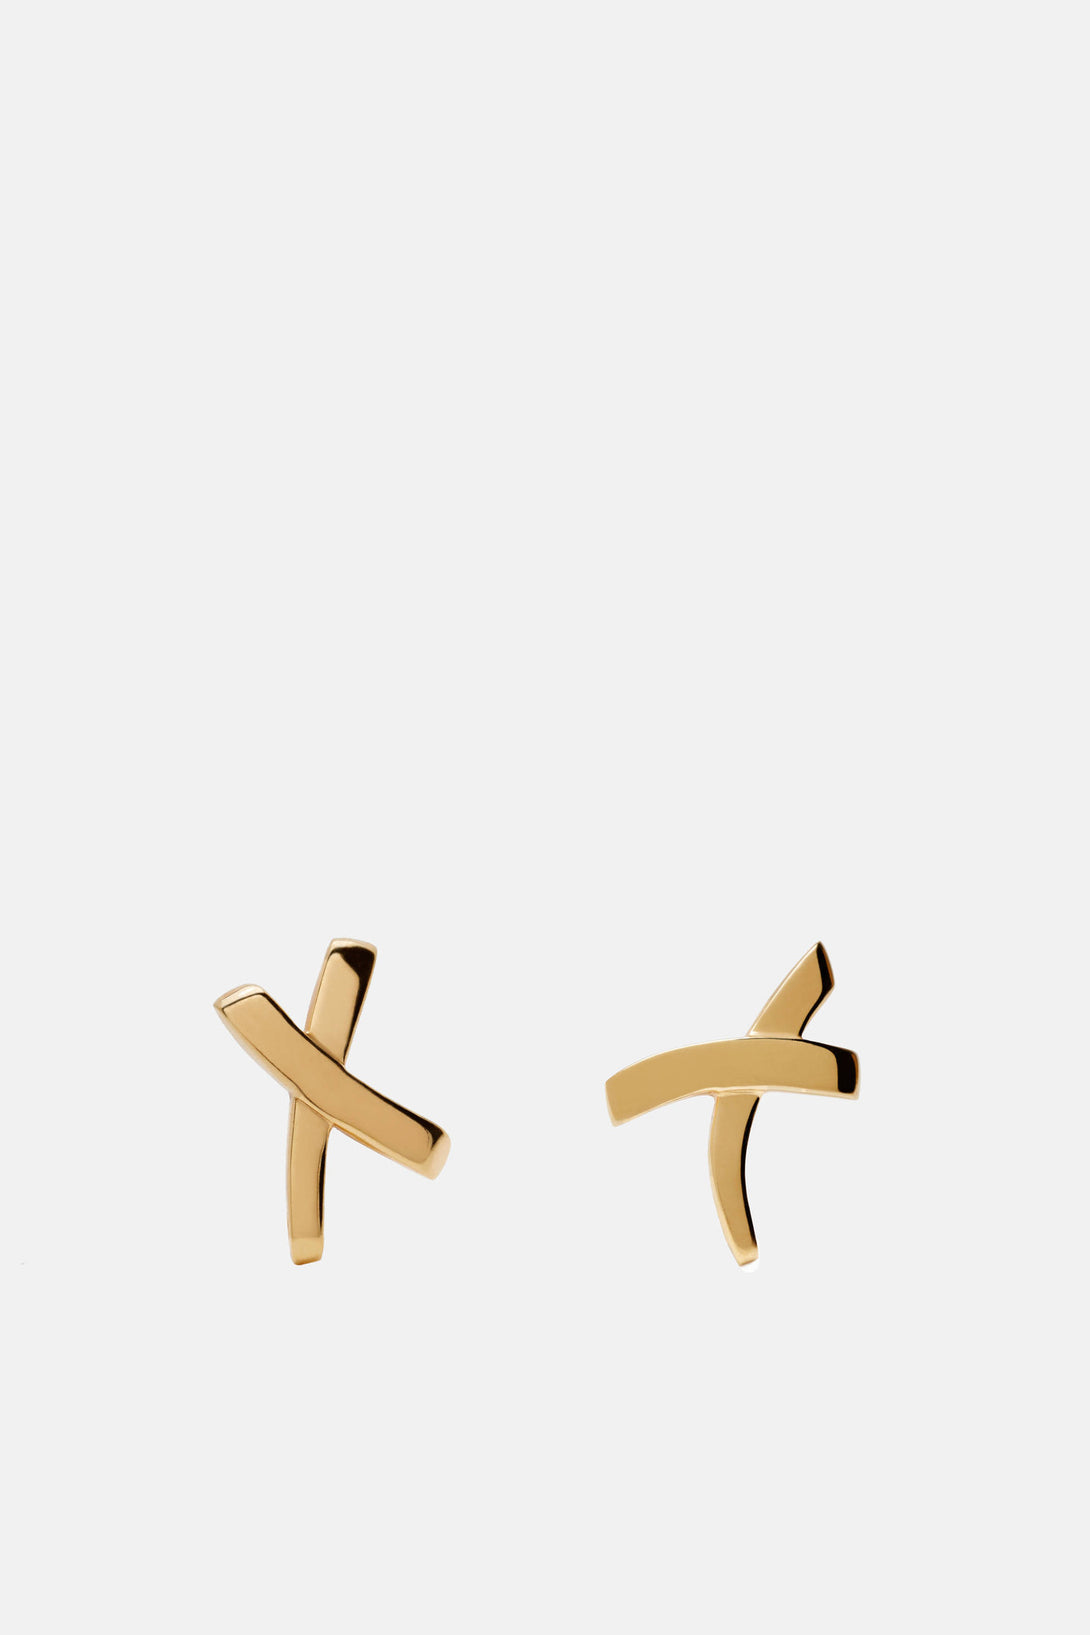 Co. Gold X Earrings by Paloma Picasso 